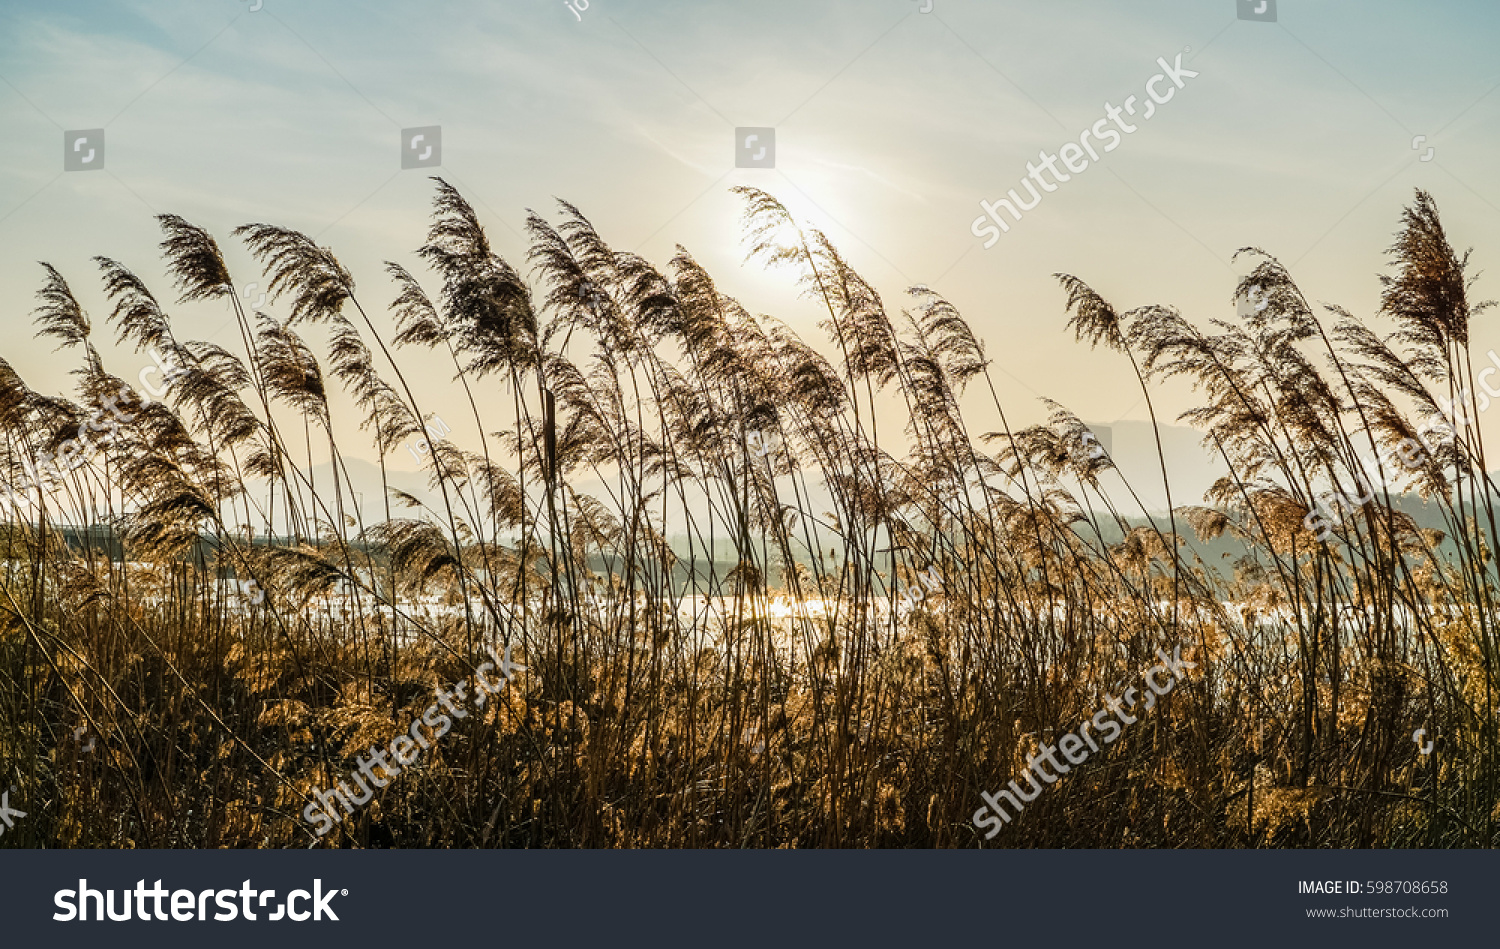 Reeds in the rive/Swaying Reed-2 #598708658